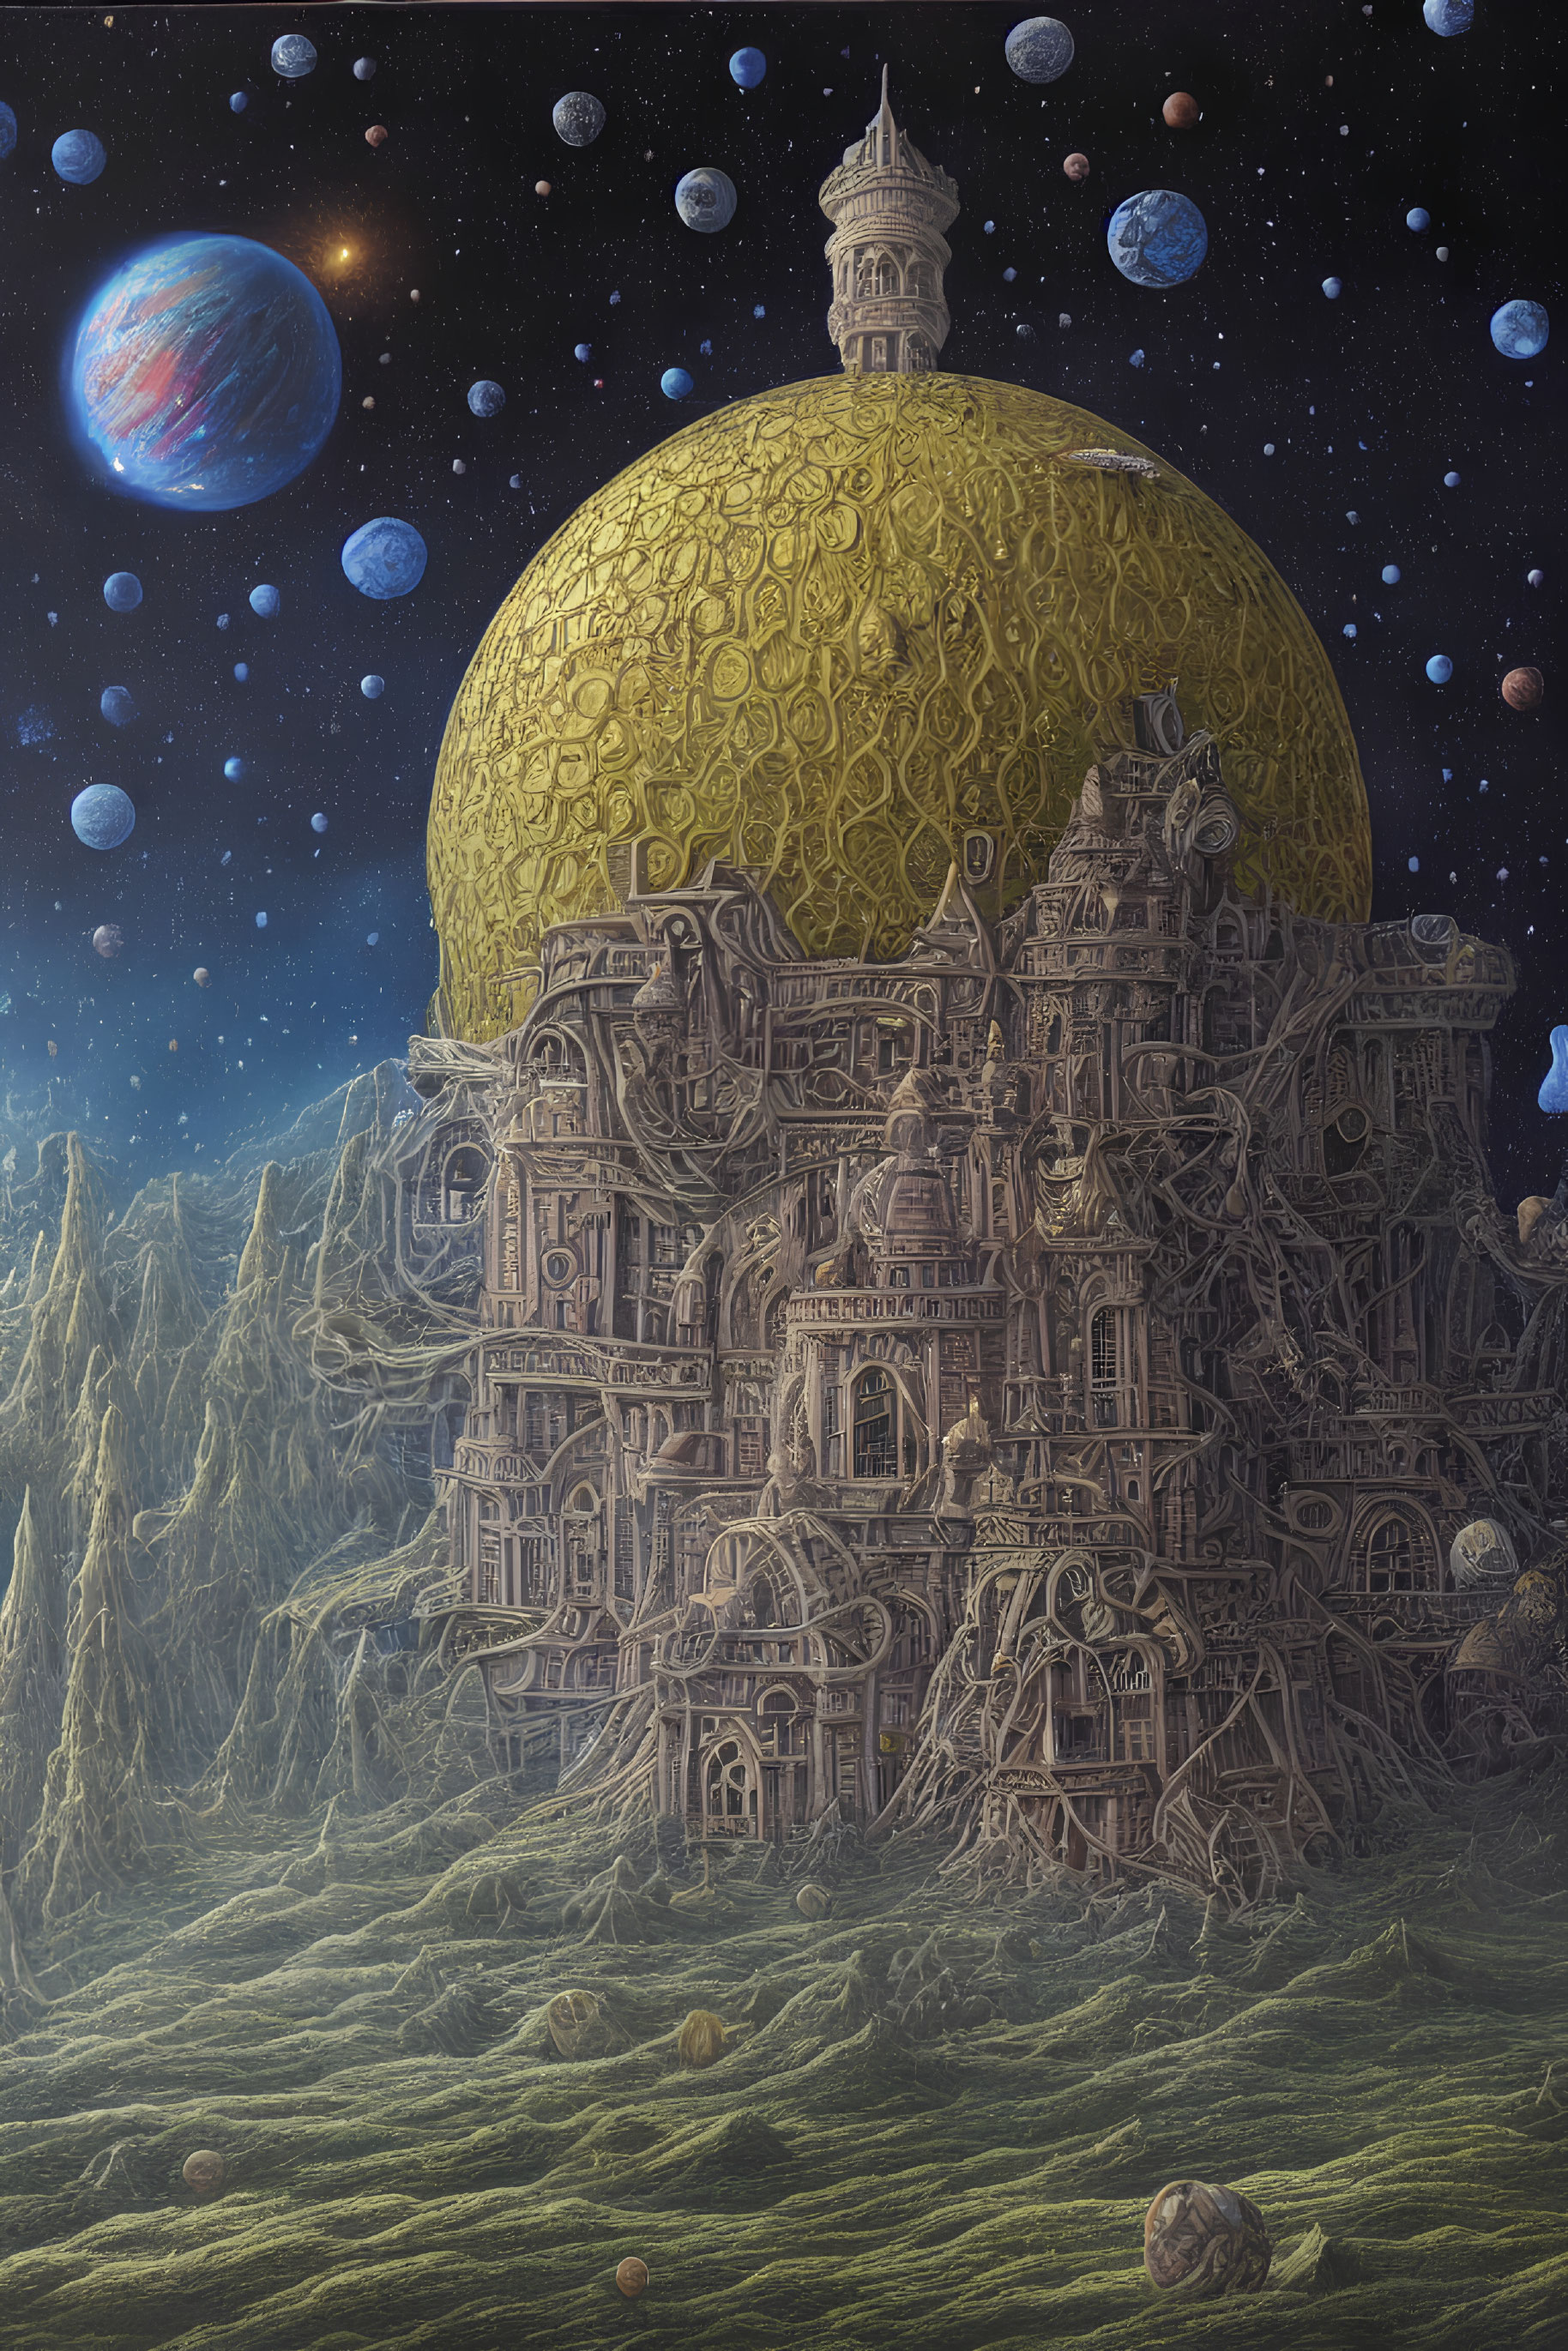 Intricate castle in cosmic landscape with textured sphere and starry sky